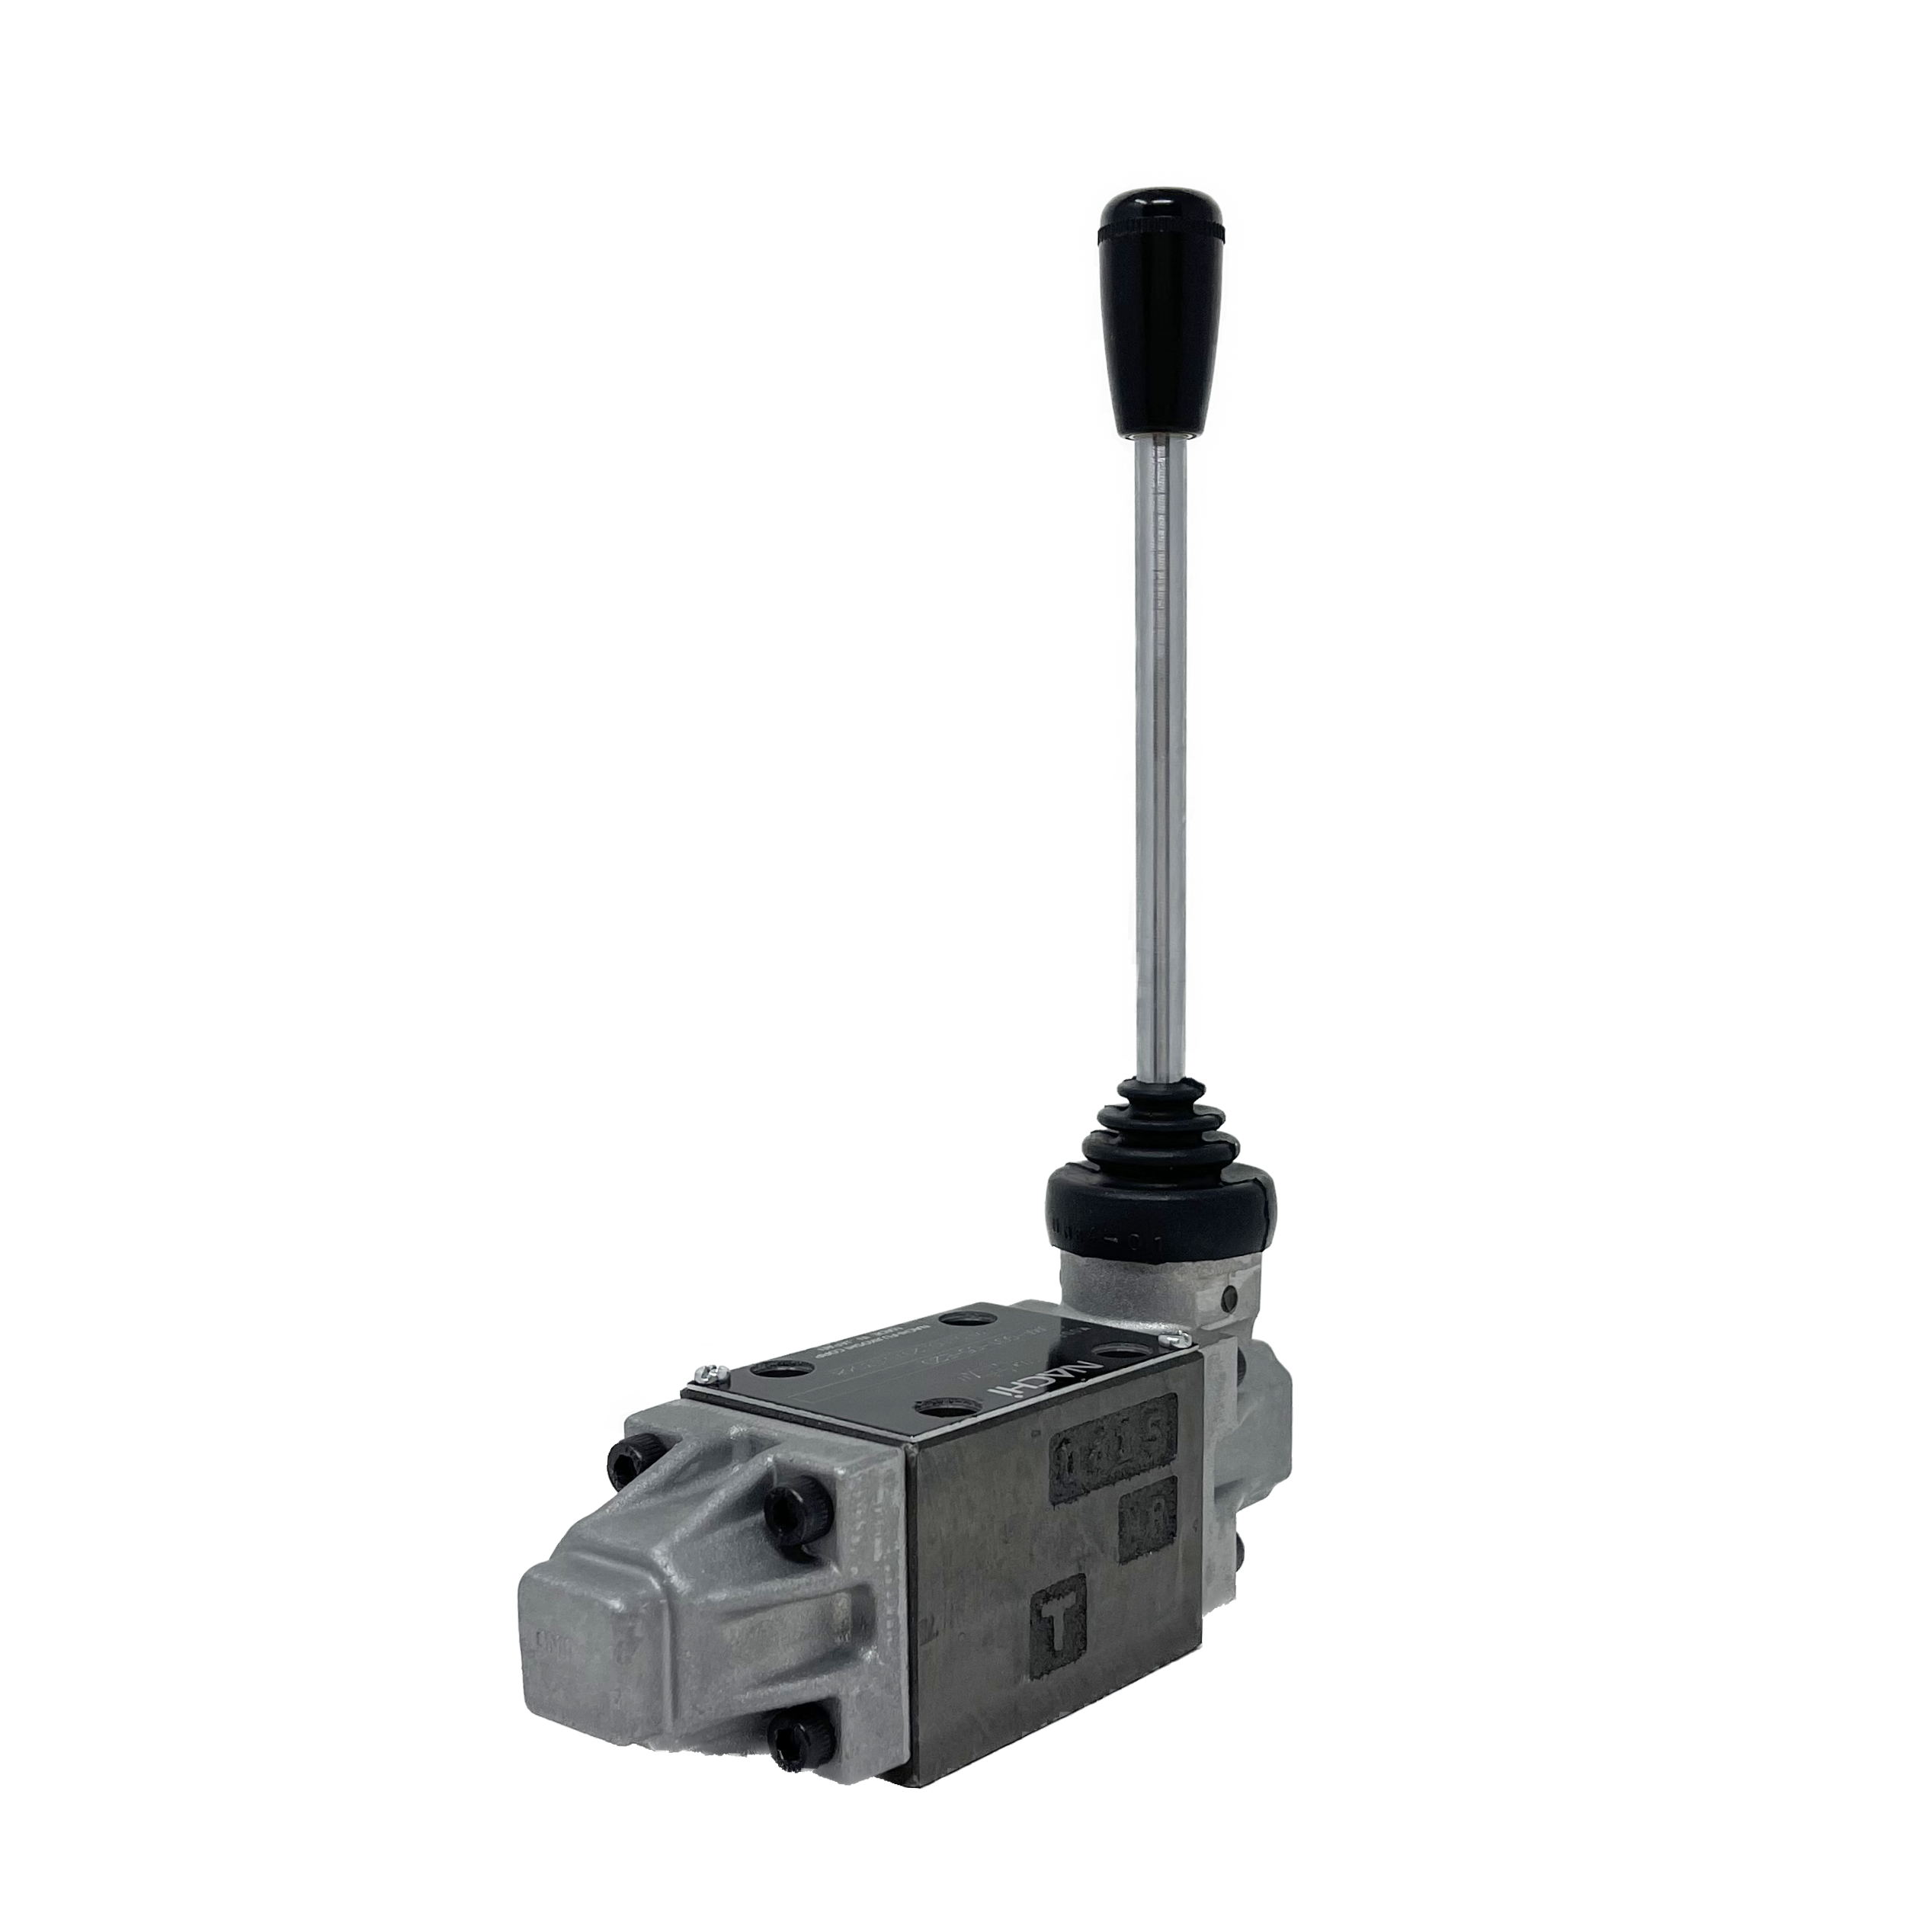 DMA-G01-C6-E20 : Nachi Manual Lever Valve, 4-Way, D03 (NG6), 10.5GPM, 5075psi, P Blocked, A&B to T in Neutral, Spring Centered